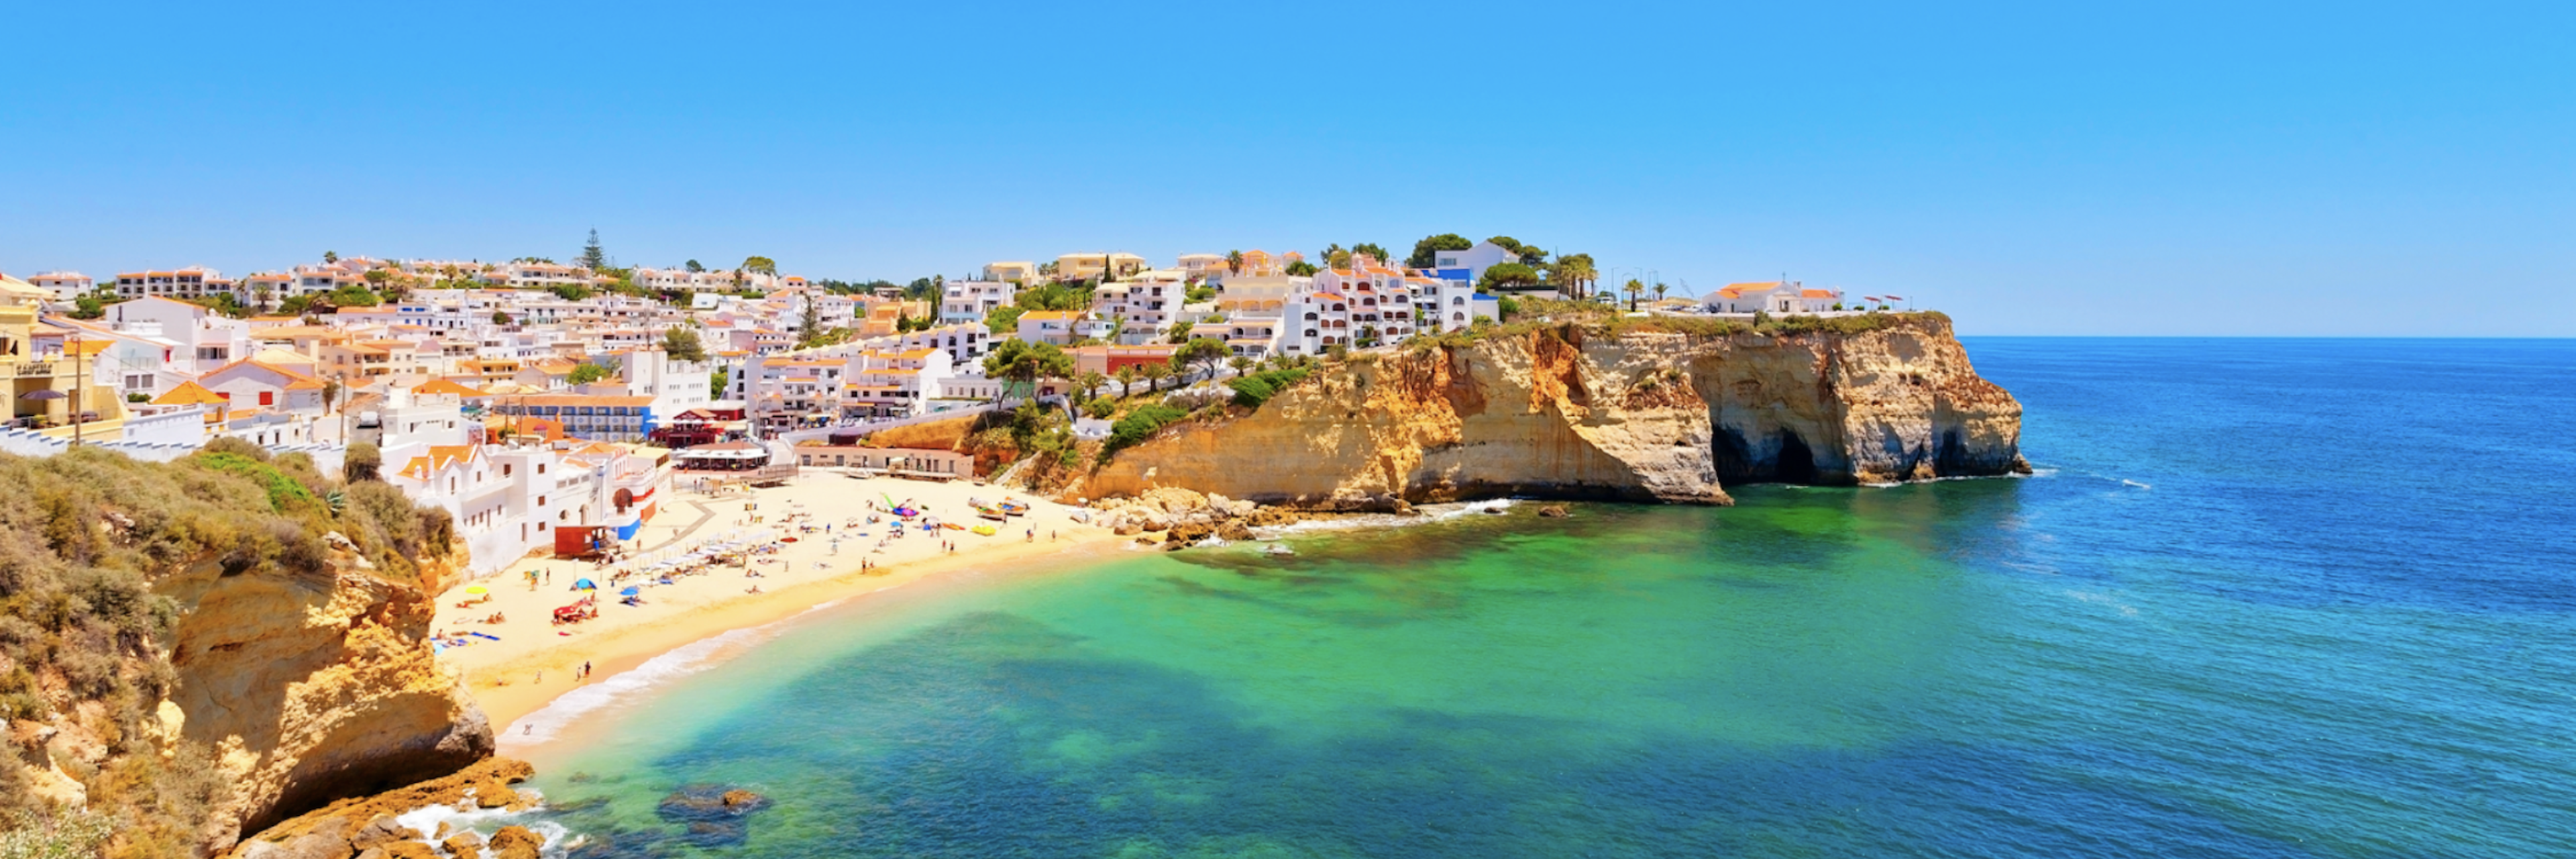 Lagos Portugal is one of the top digital nomad villages in Europe